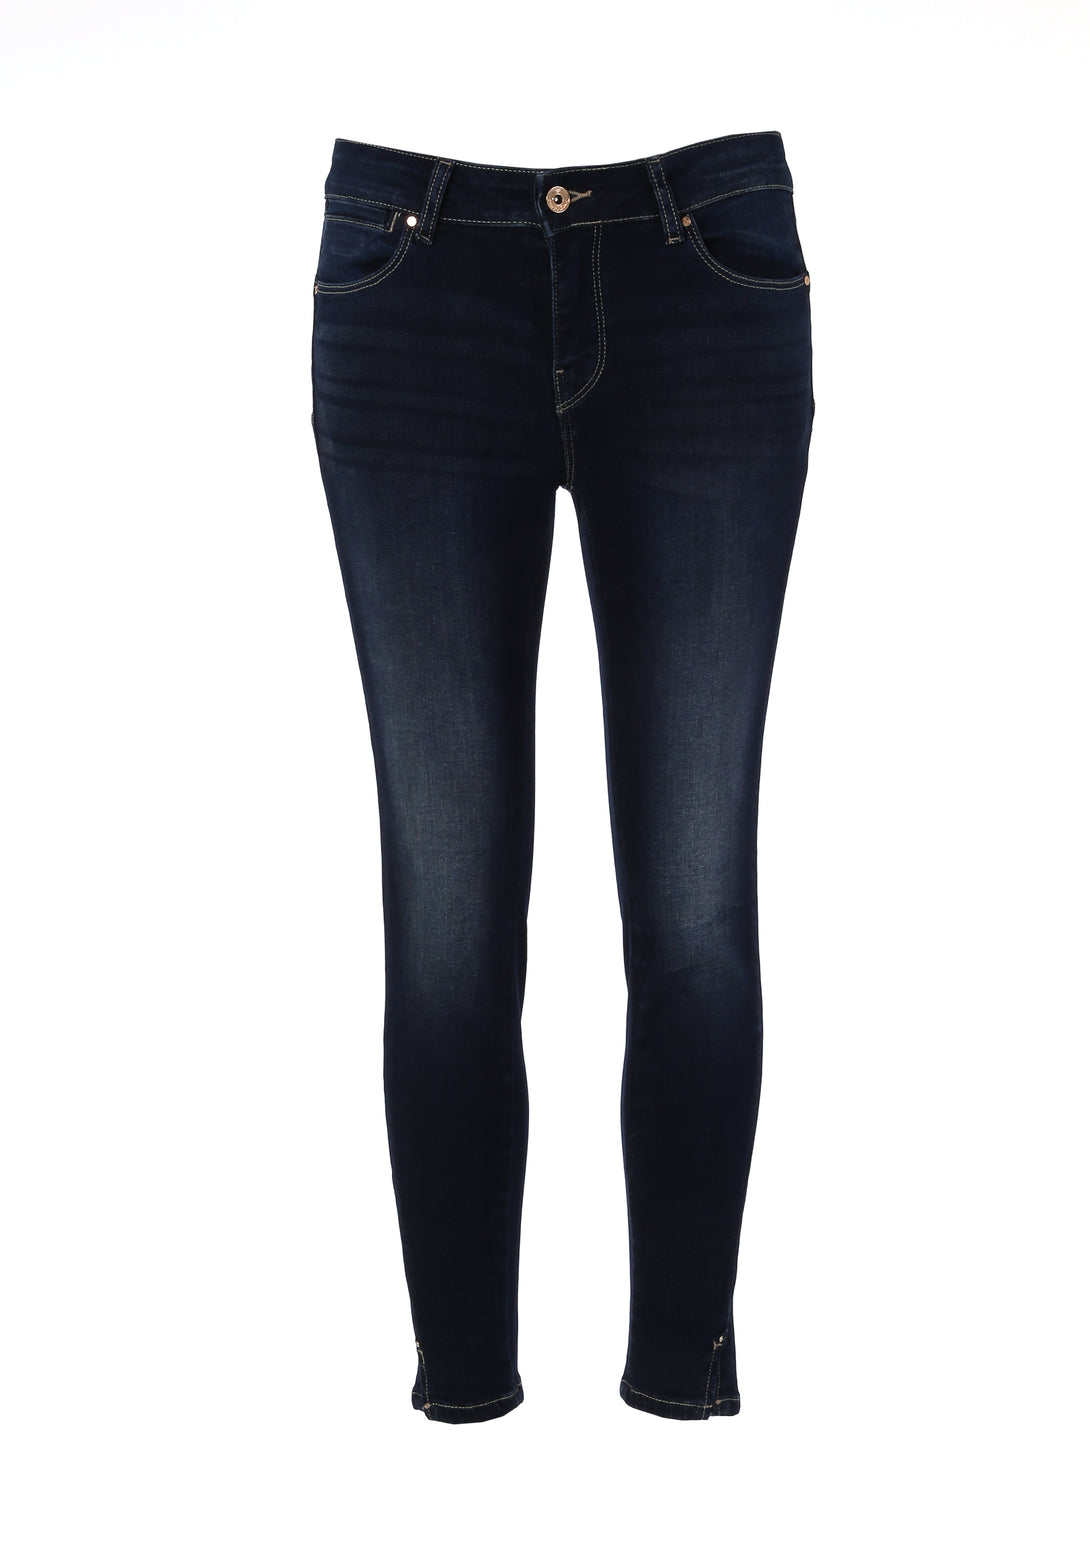 Jeans cropped with push-up effect made in denim with dark wash Fracomina FP000V9002D40101-117-1